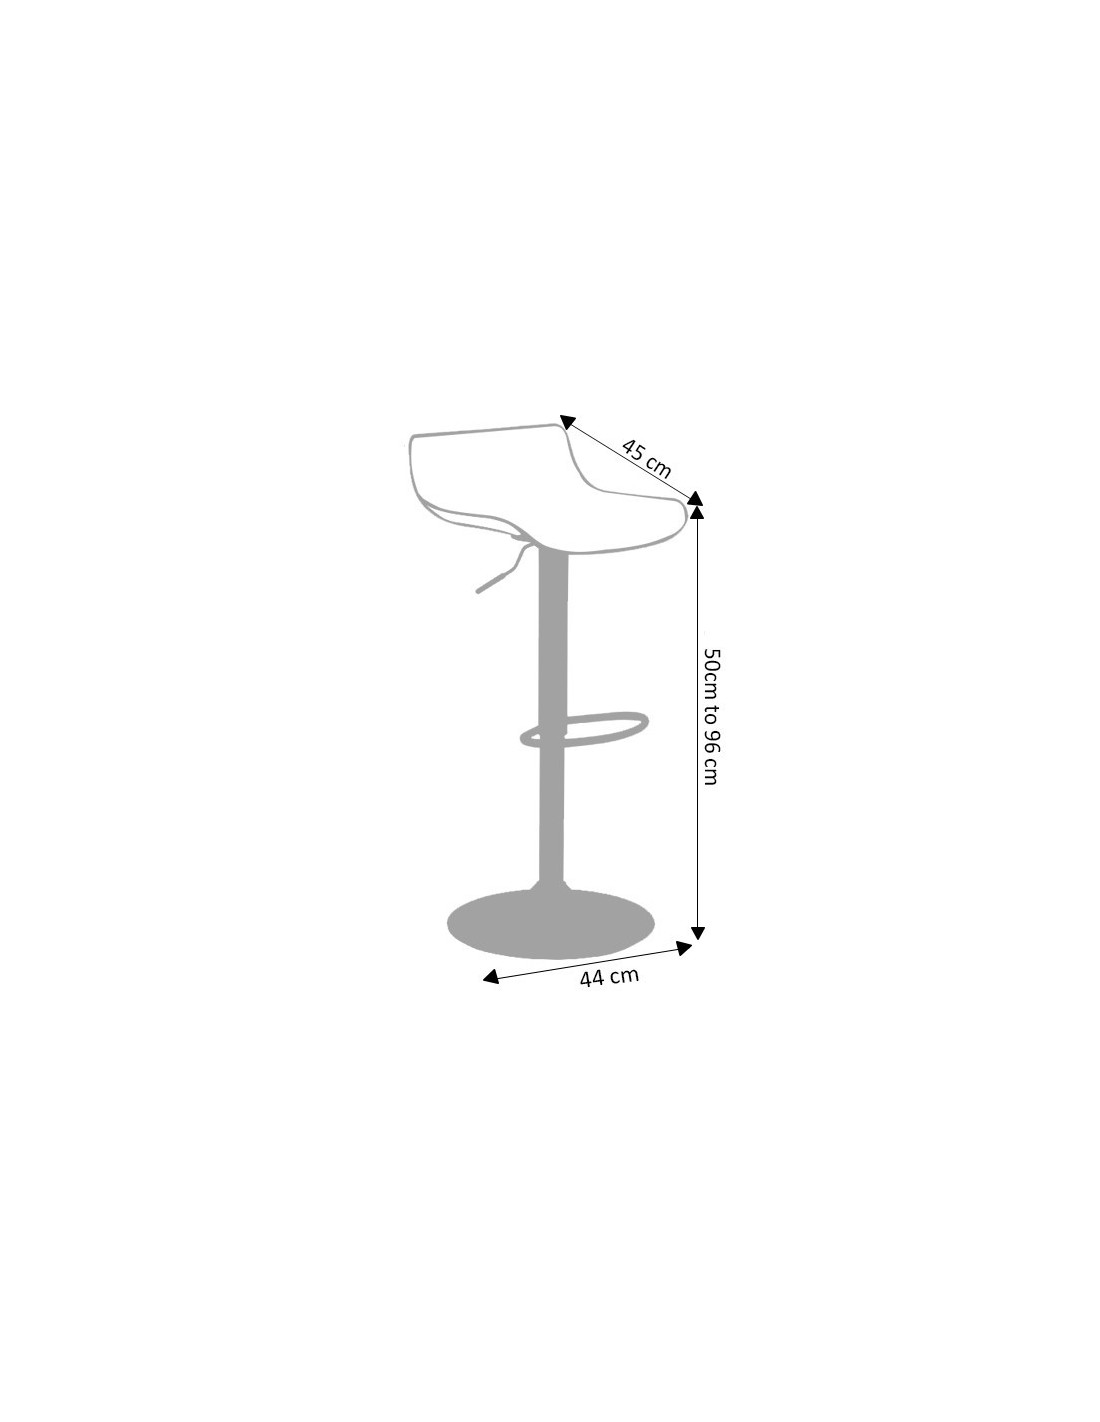 Swivel Kitchen Bar Stool Adjustable Height, How To Measure What Size Bar Stool You Need